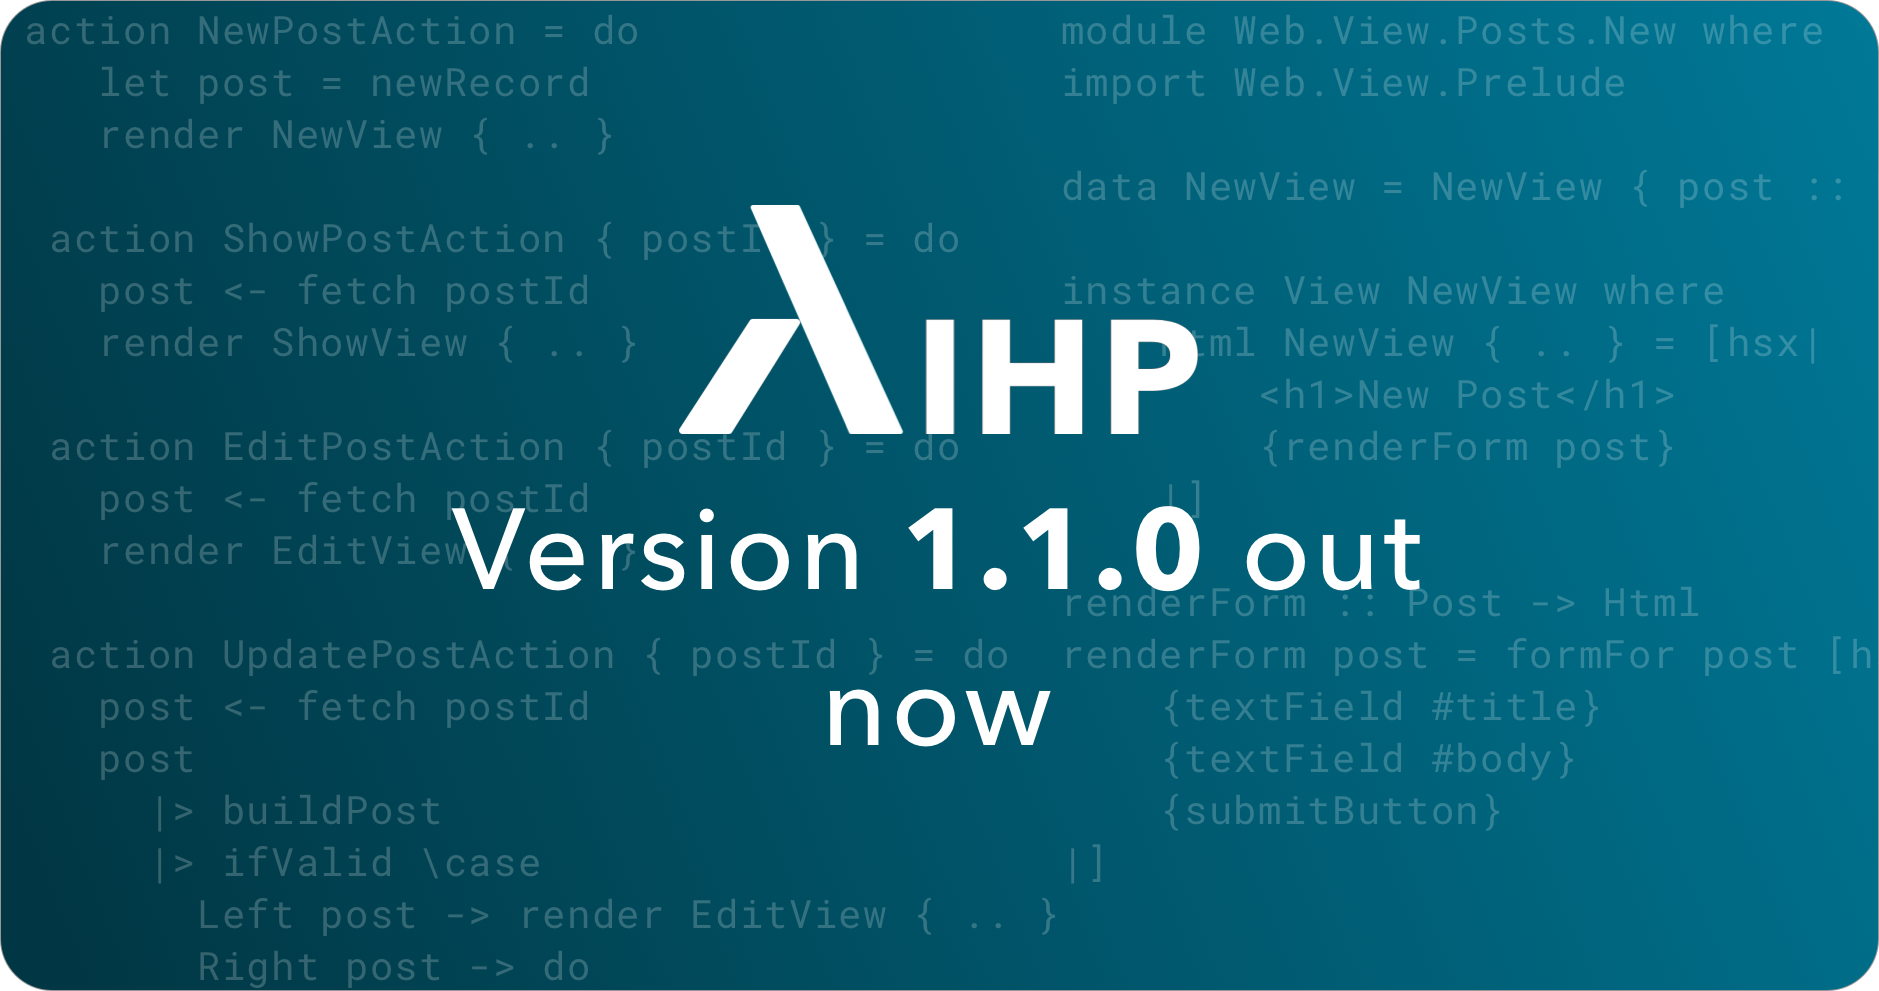 IHP v1.1.0 is out now